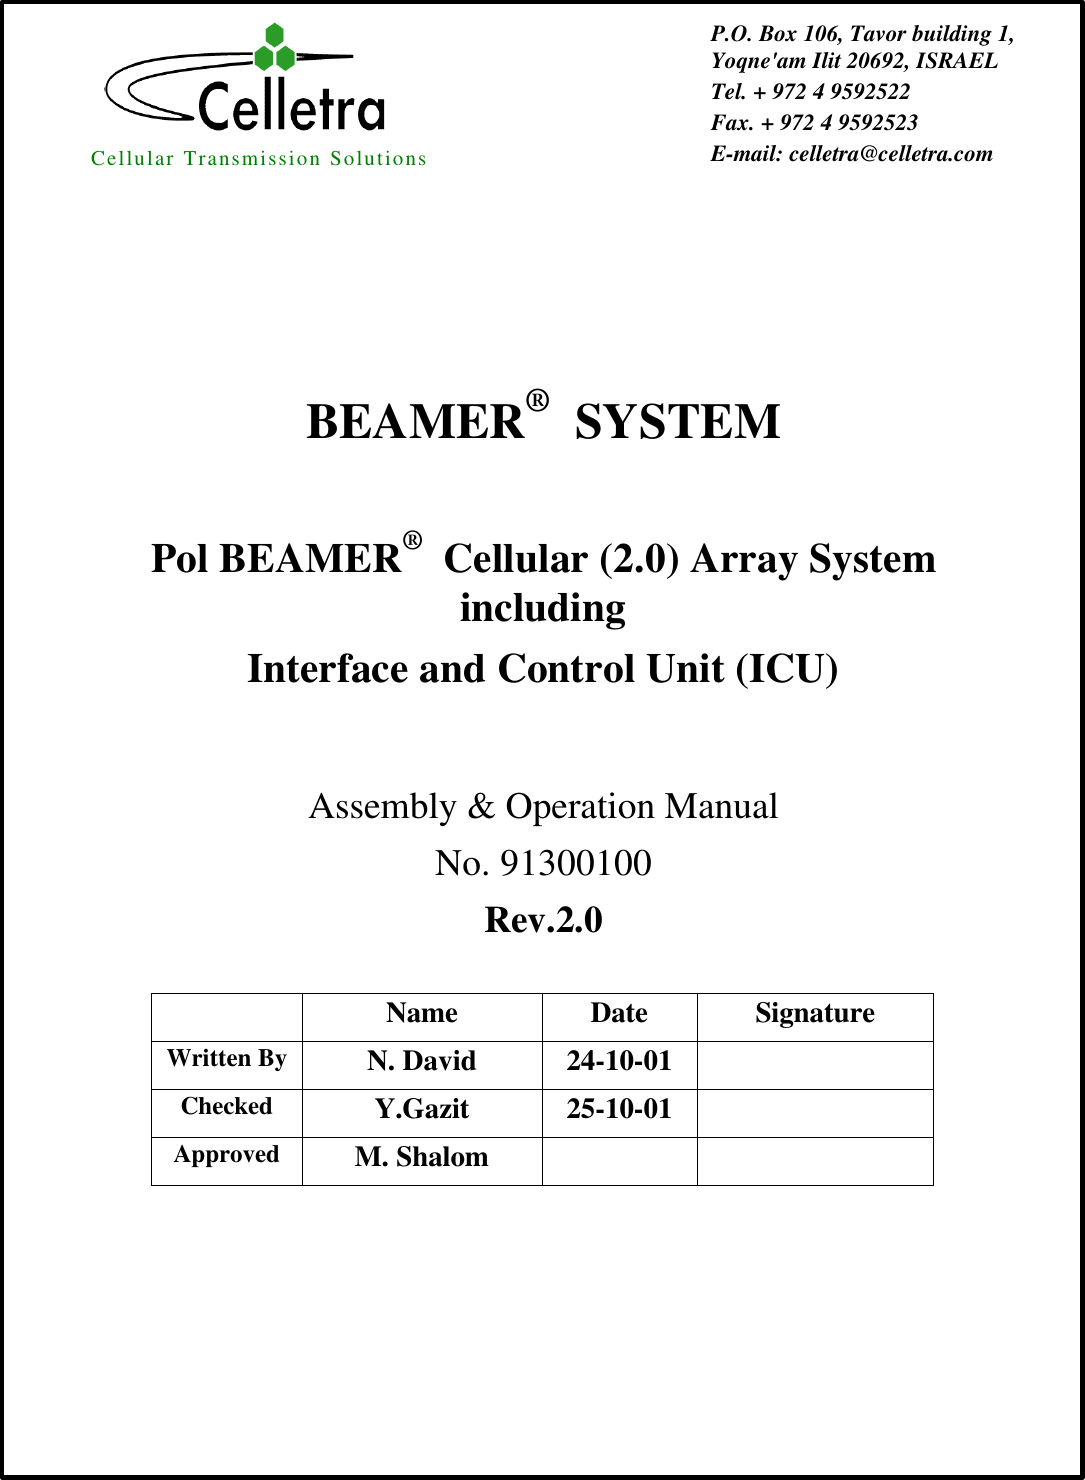 Cellular Transmission SolutionsP.O. Box 106, Tavor building 1,Yoqne&apos;am Ilit 20692, ISRAELTel. + 972 4 9592522Fax. + 972 4 9592523E-mail: celletra@celletra.comBEAMER®  SYSTEMPol BEAMER®  Cellular (2.0) Array SystemincludingInterface and Control Unit (ICU)Assembly &amp; Operation ManualNo. 91300100Rev.2.0Name Date SignatureWritten By N. David 24-10-01Checked Y.Gazit 25-10-01Approved M. Shalom